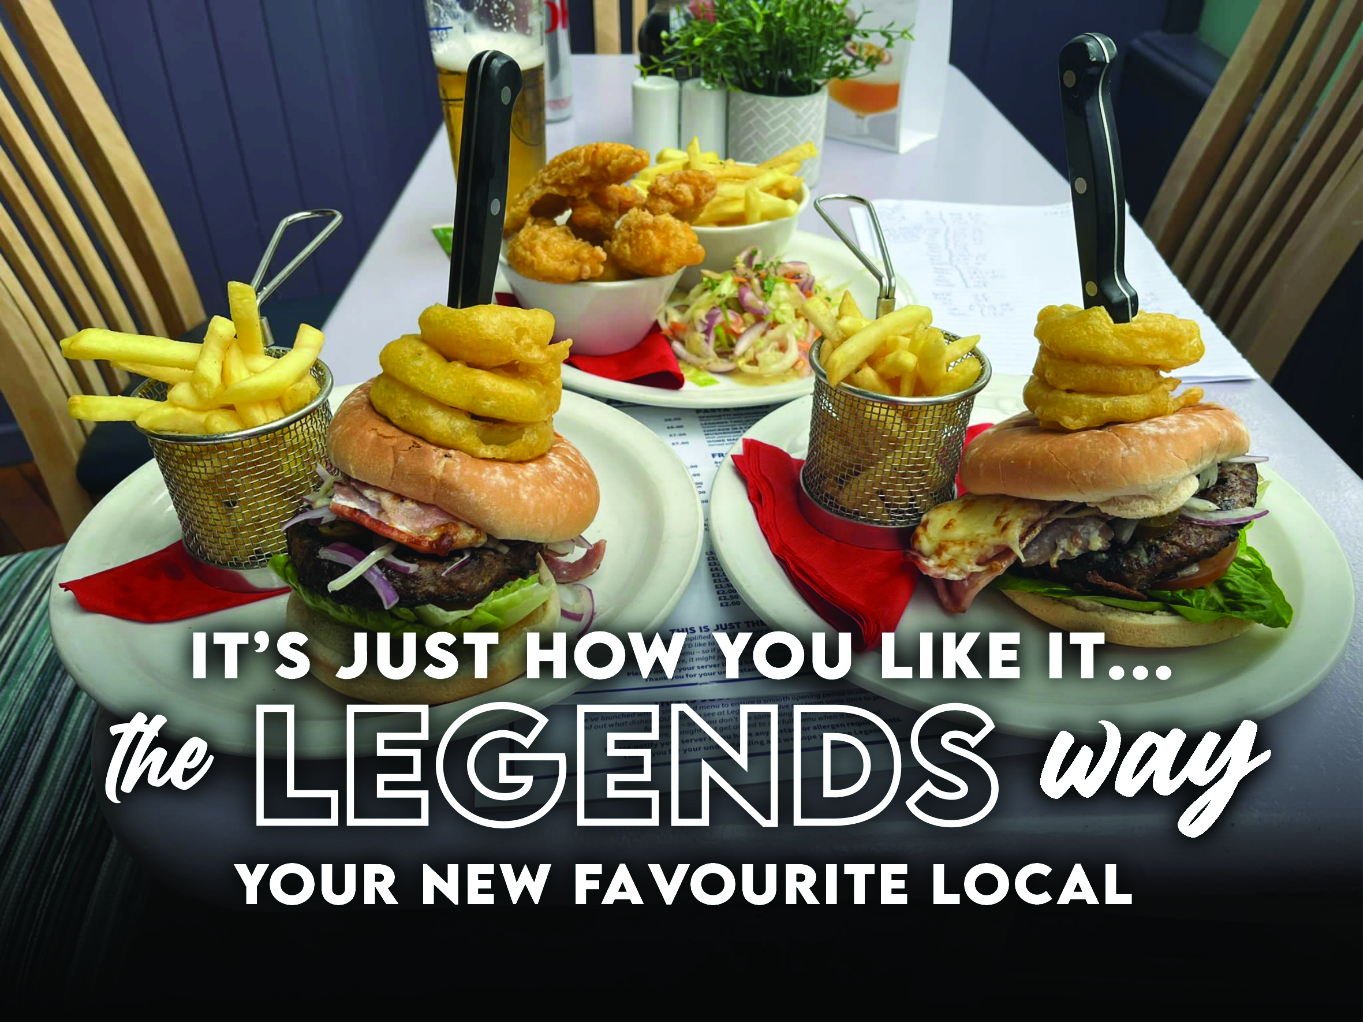 DELICIOUS DISHES SERVED THE LEGENDS WAY